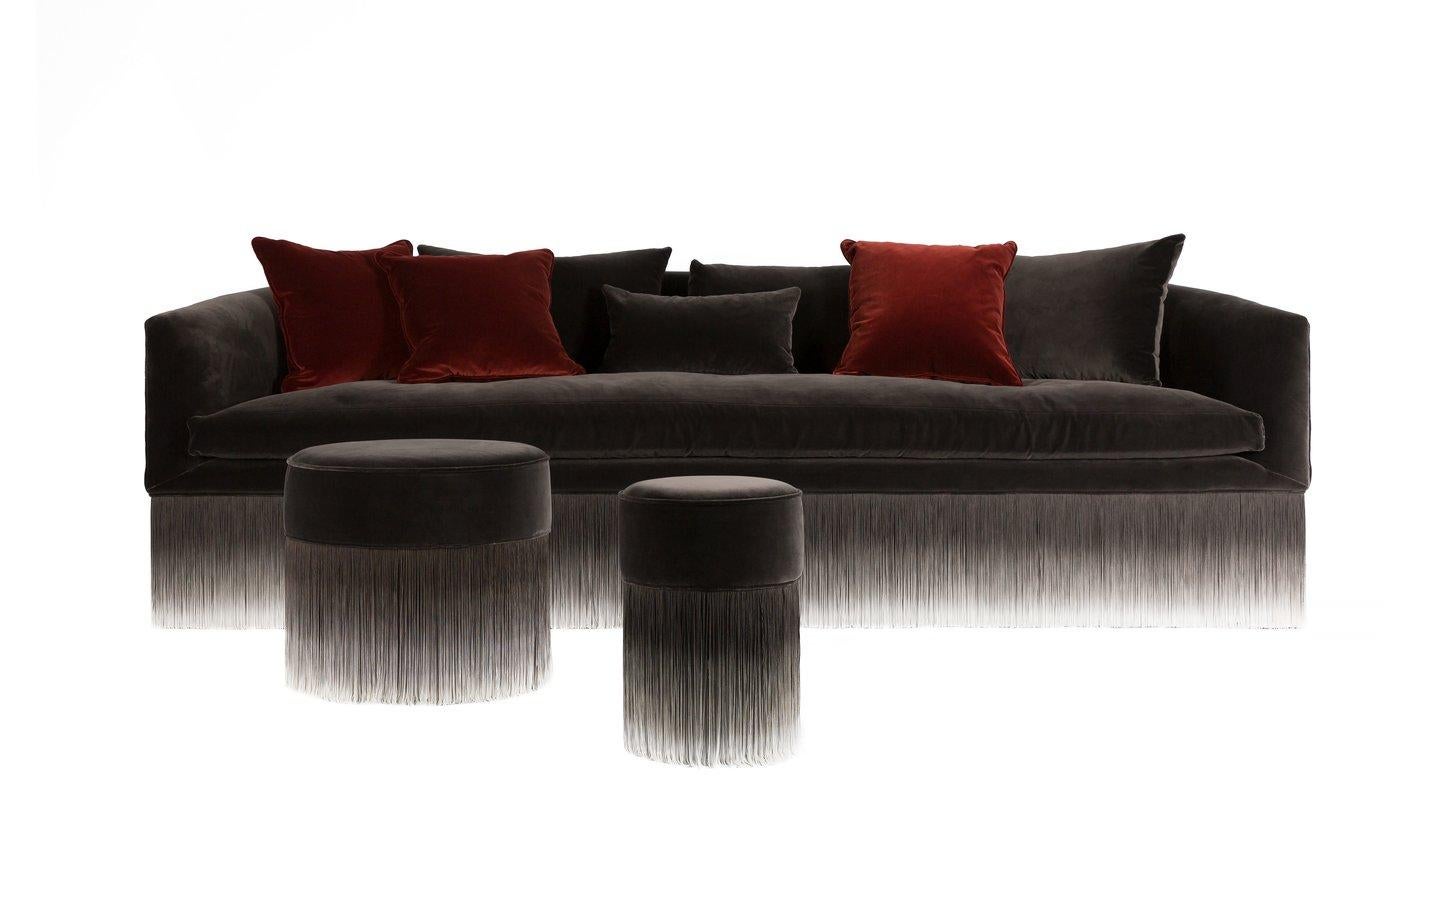 An elegant and comfortable sofa dressed in heart-warming velvet, softly floating on long sensuous fringes that decorate and enhance it, producing a fresh breeze of lightness all around the room: this is For You by Lorenza Bozzoli. The sofa’s